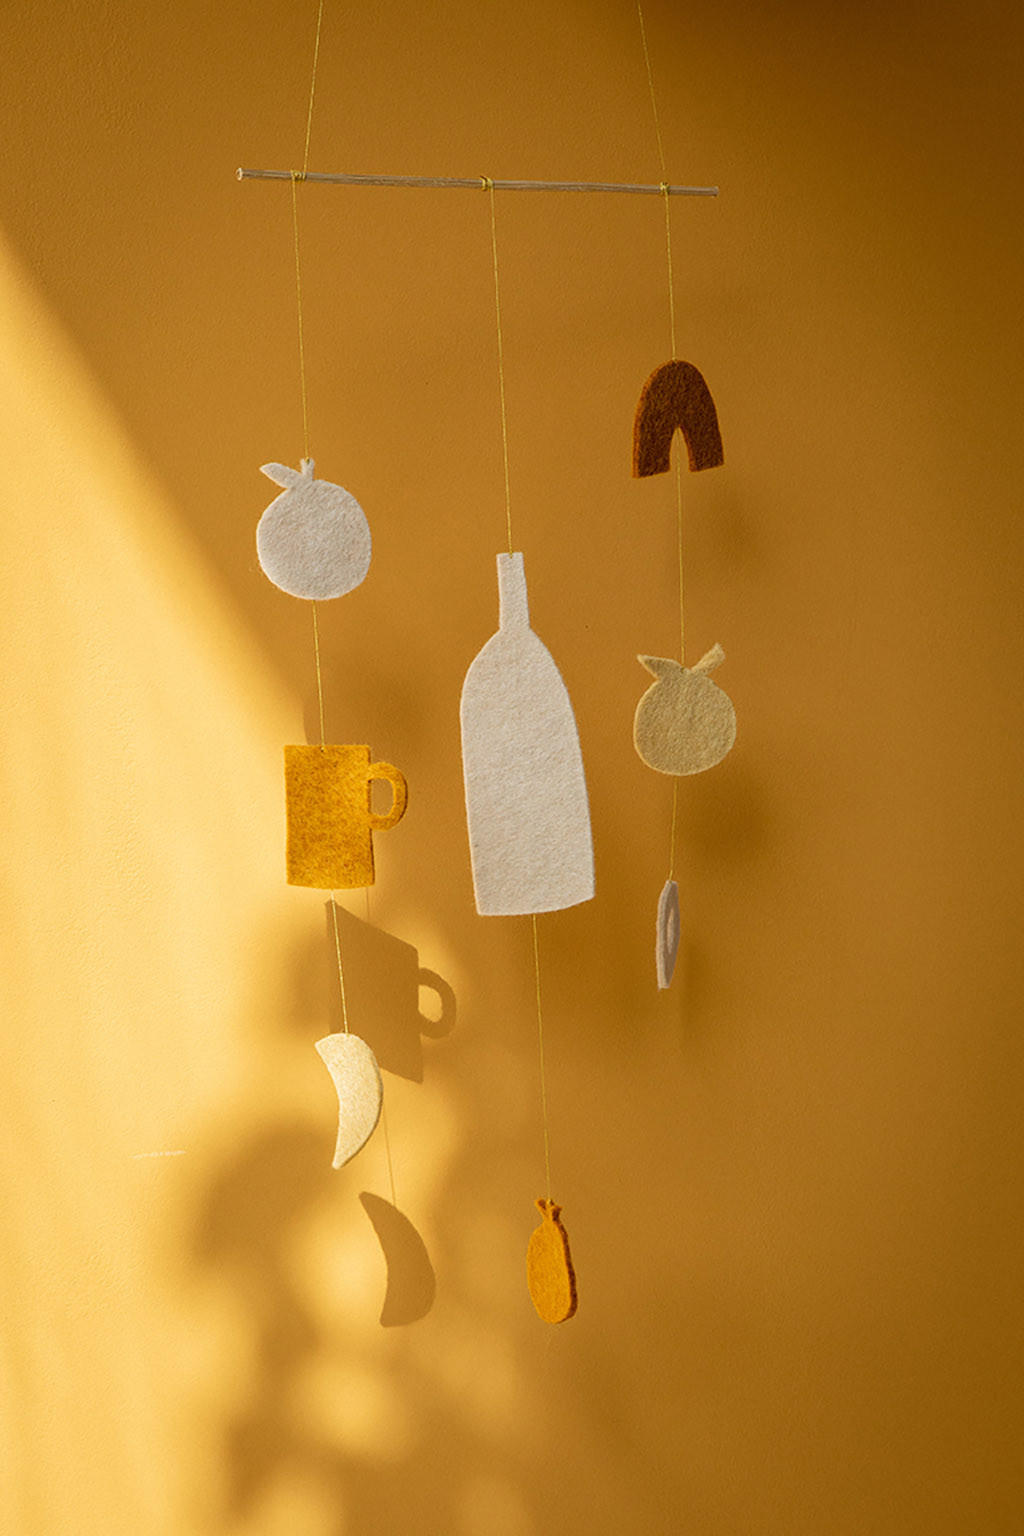 Felt and bamboo decorative hanging mobile